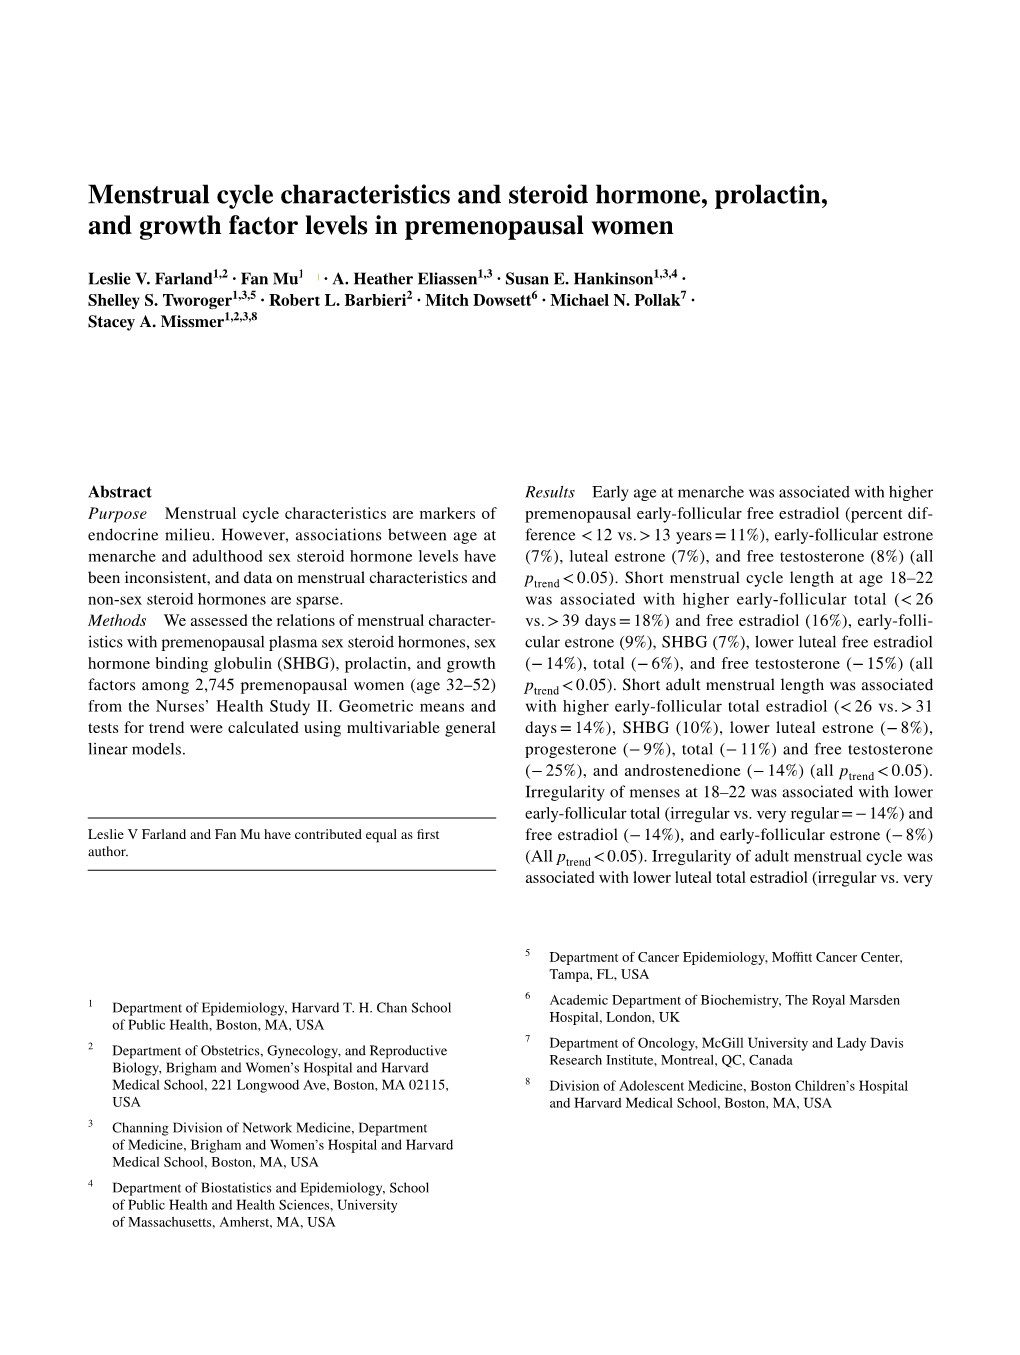 Menstrual Cycle Characteristics and Steroid Hormone, Prolactin, and Growth Factor Levels in Premenopausal Women